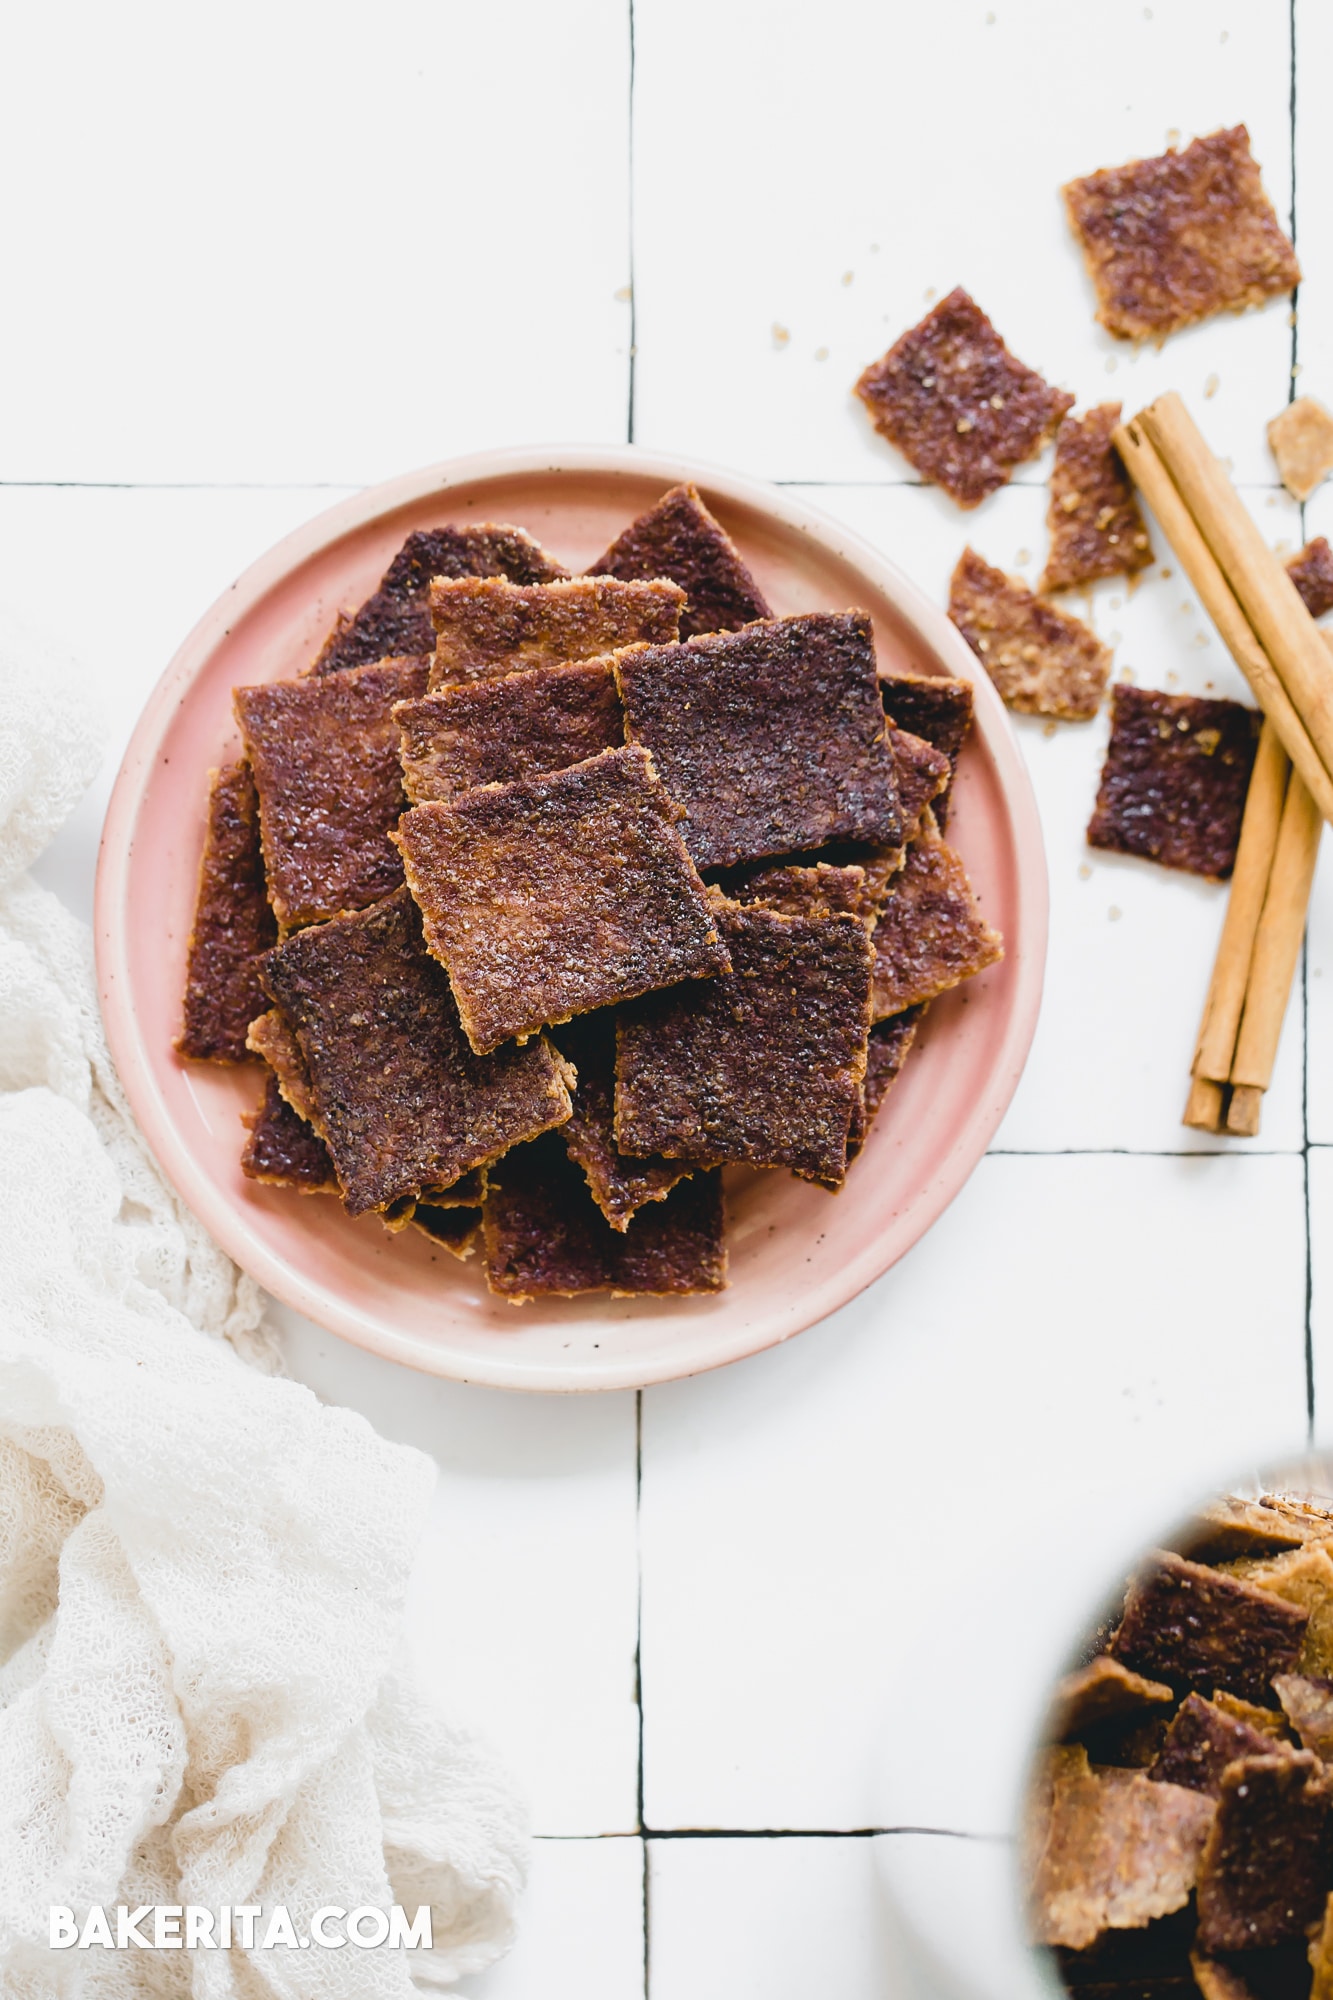 Have leftover sourdough discard? Make these Gluten-Free Cinnamon Sugar Sourdough Discard Crackers! These gluten-free crackers are quick and simple to make, and sure to satisfy your snacky sweet tooth!